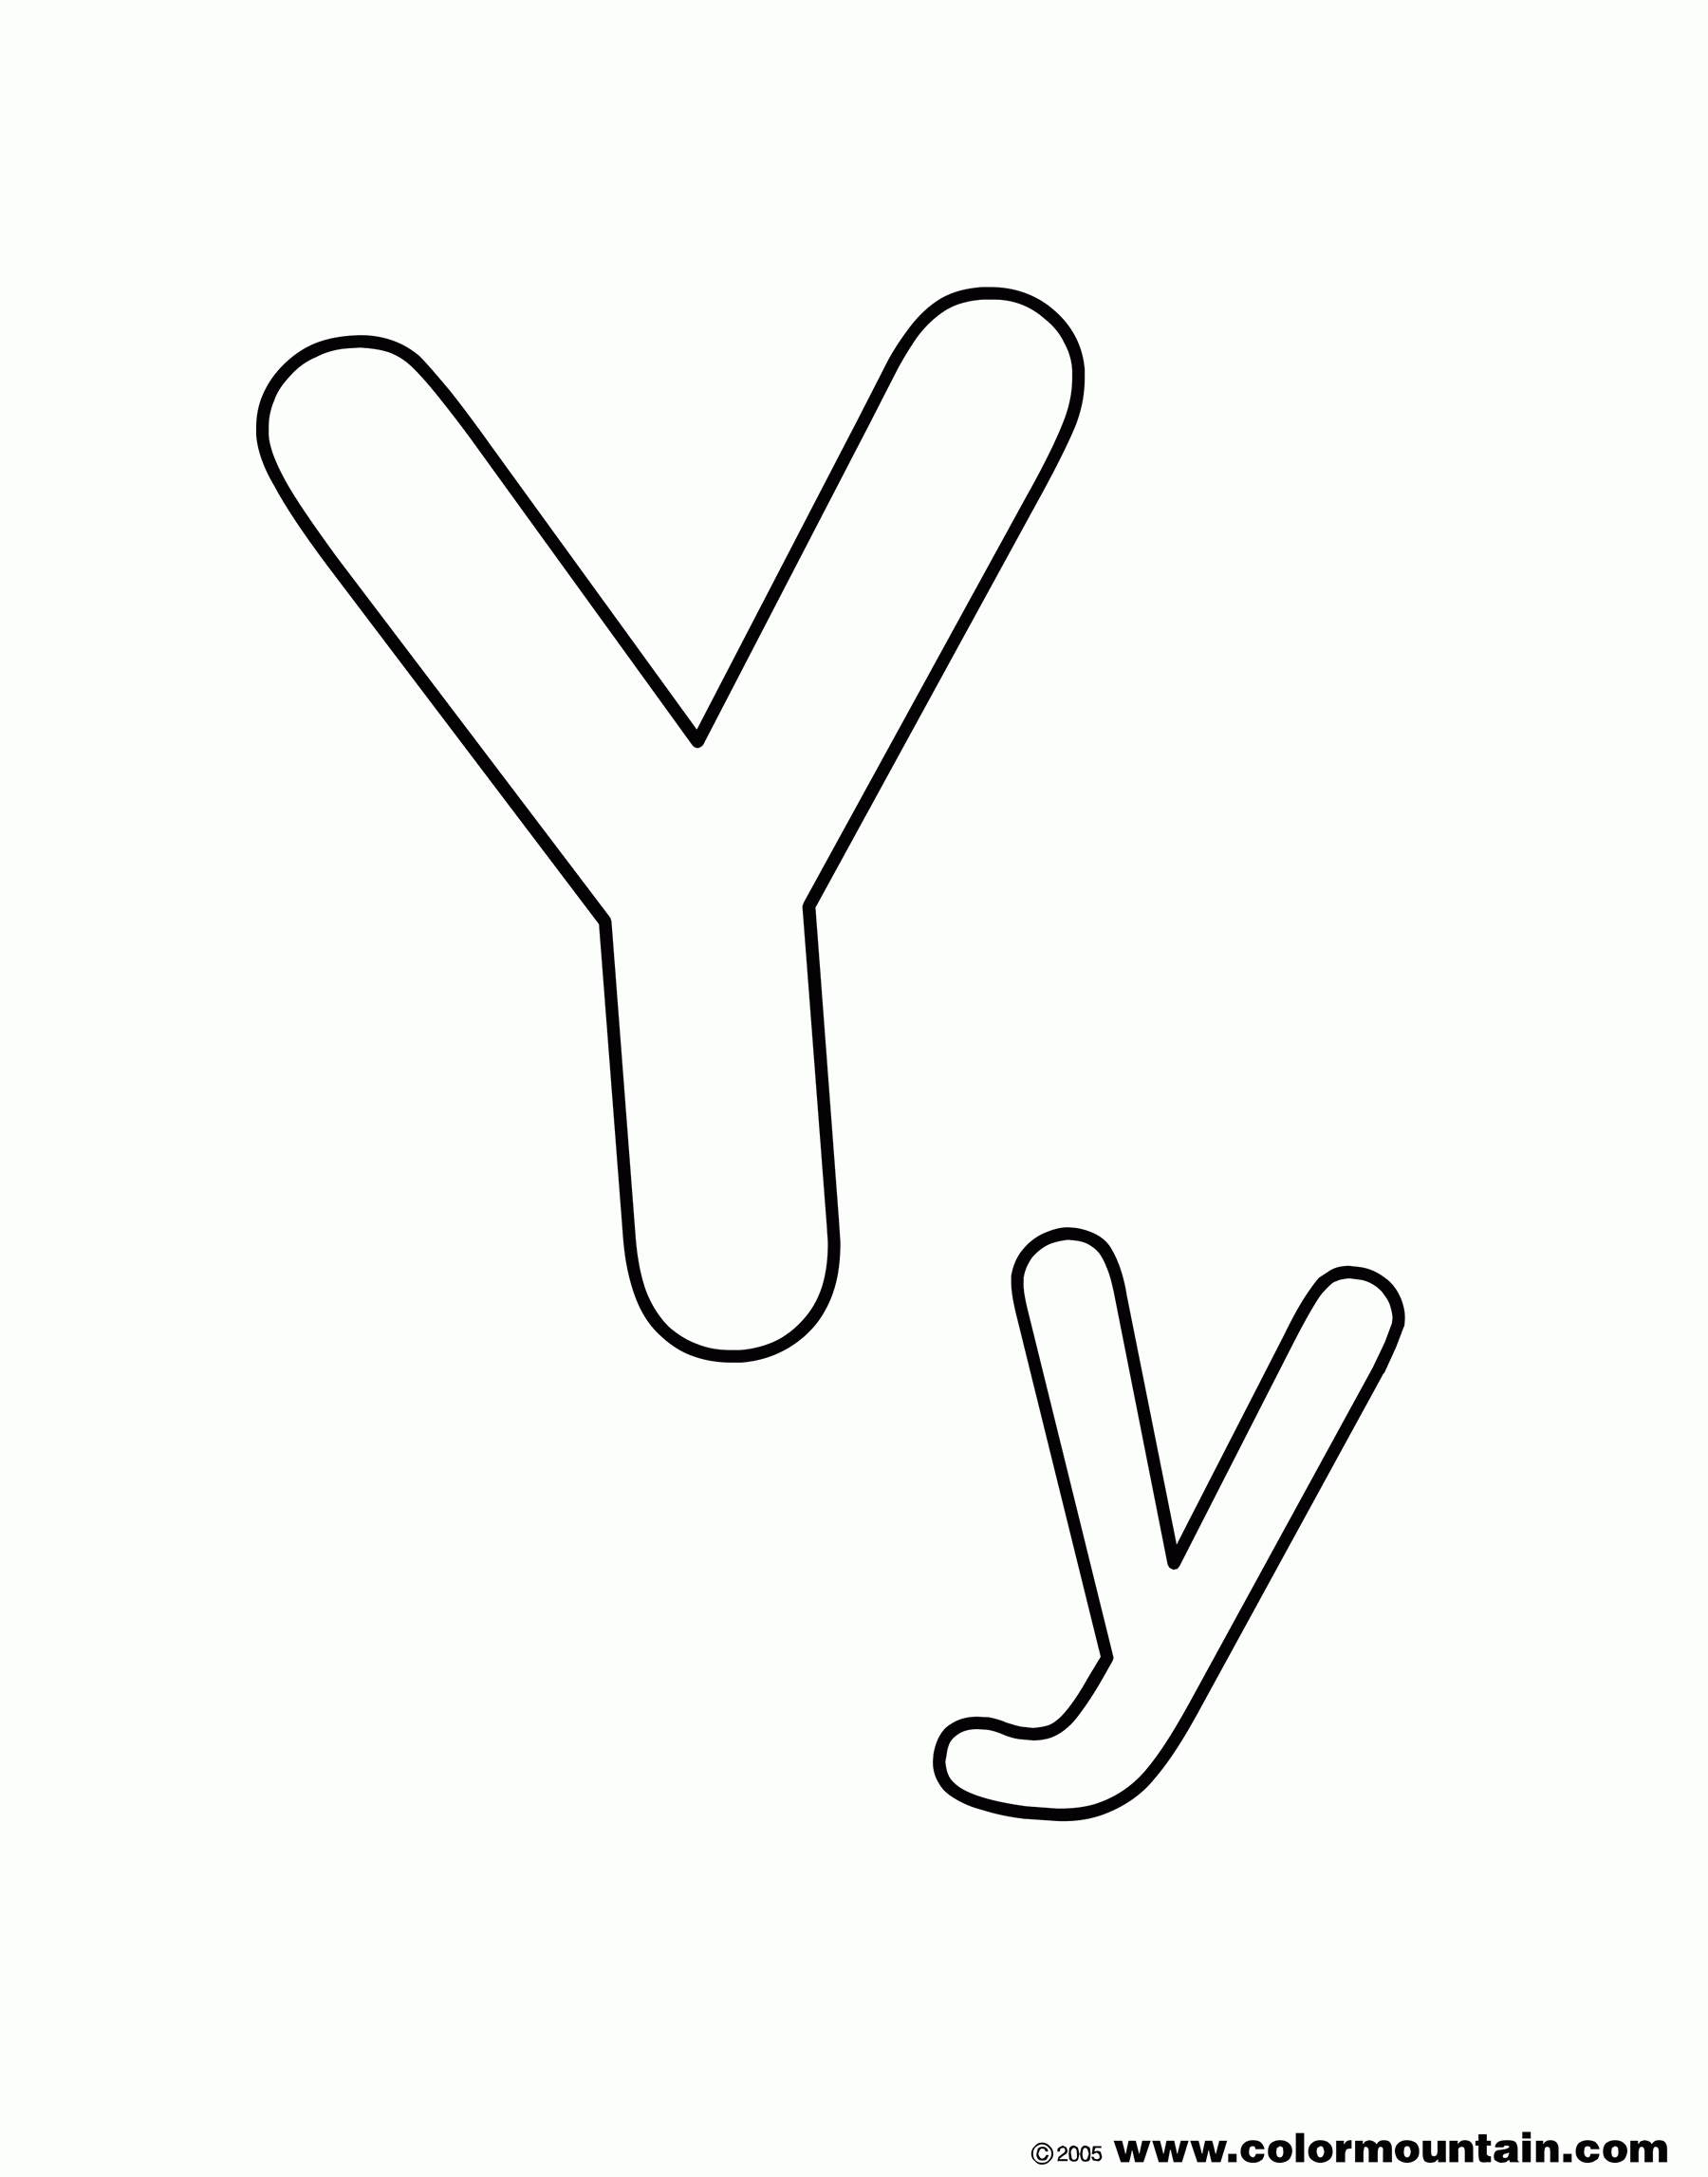 Download The Letter Y Coloring Pages - Coloring Home